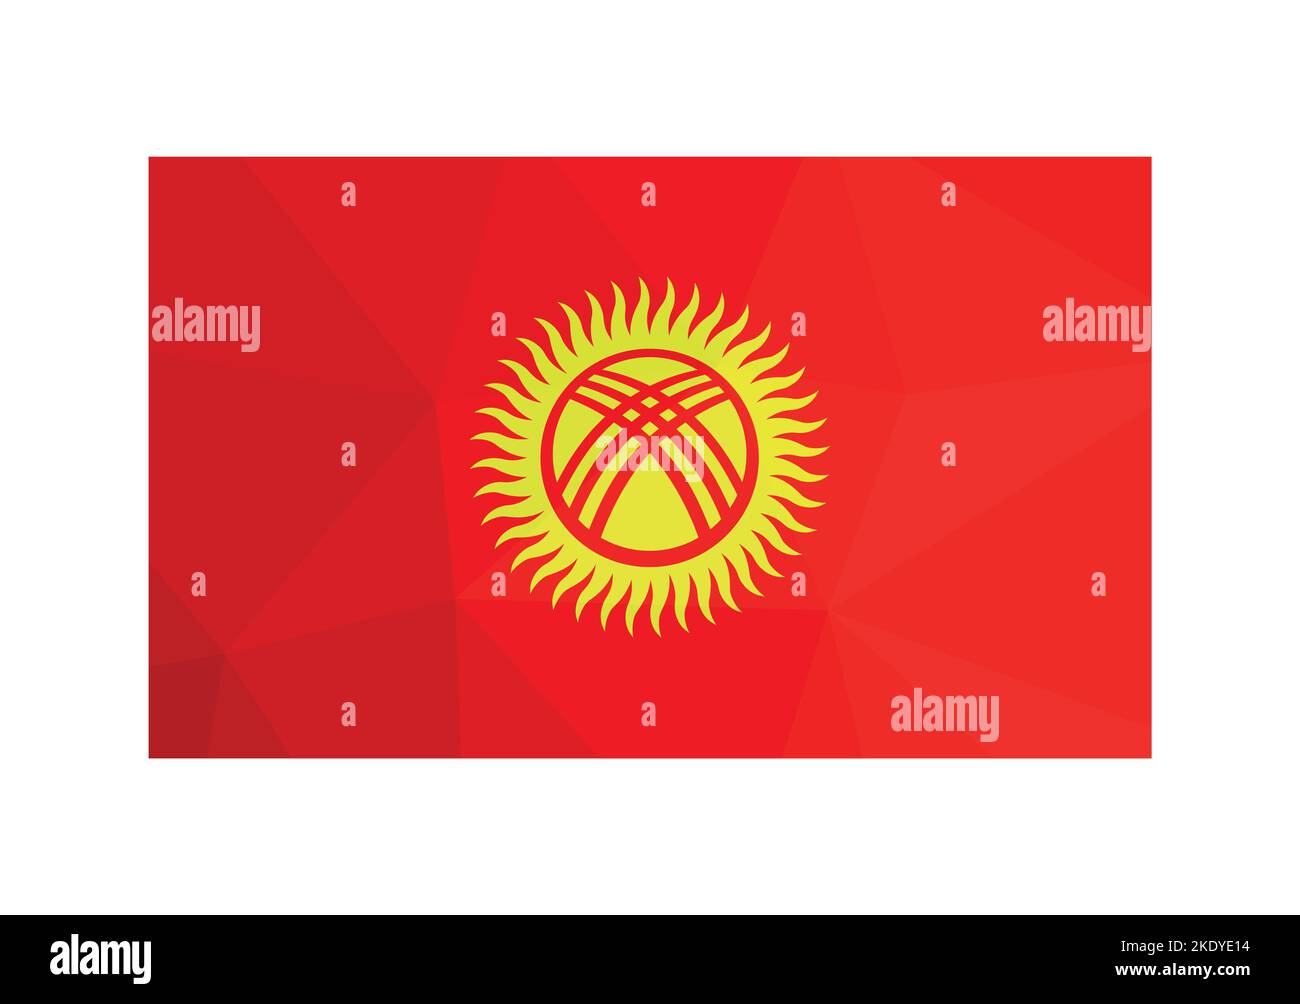 Vector illustration. Official ensign of Kyrgyzstan. National flag in red and yellow colors. Creative design in low poly style with triangular shapes. Stock Vector